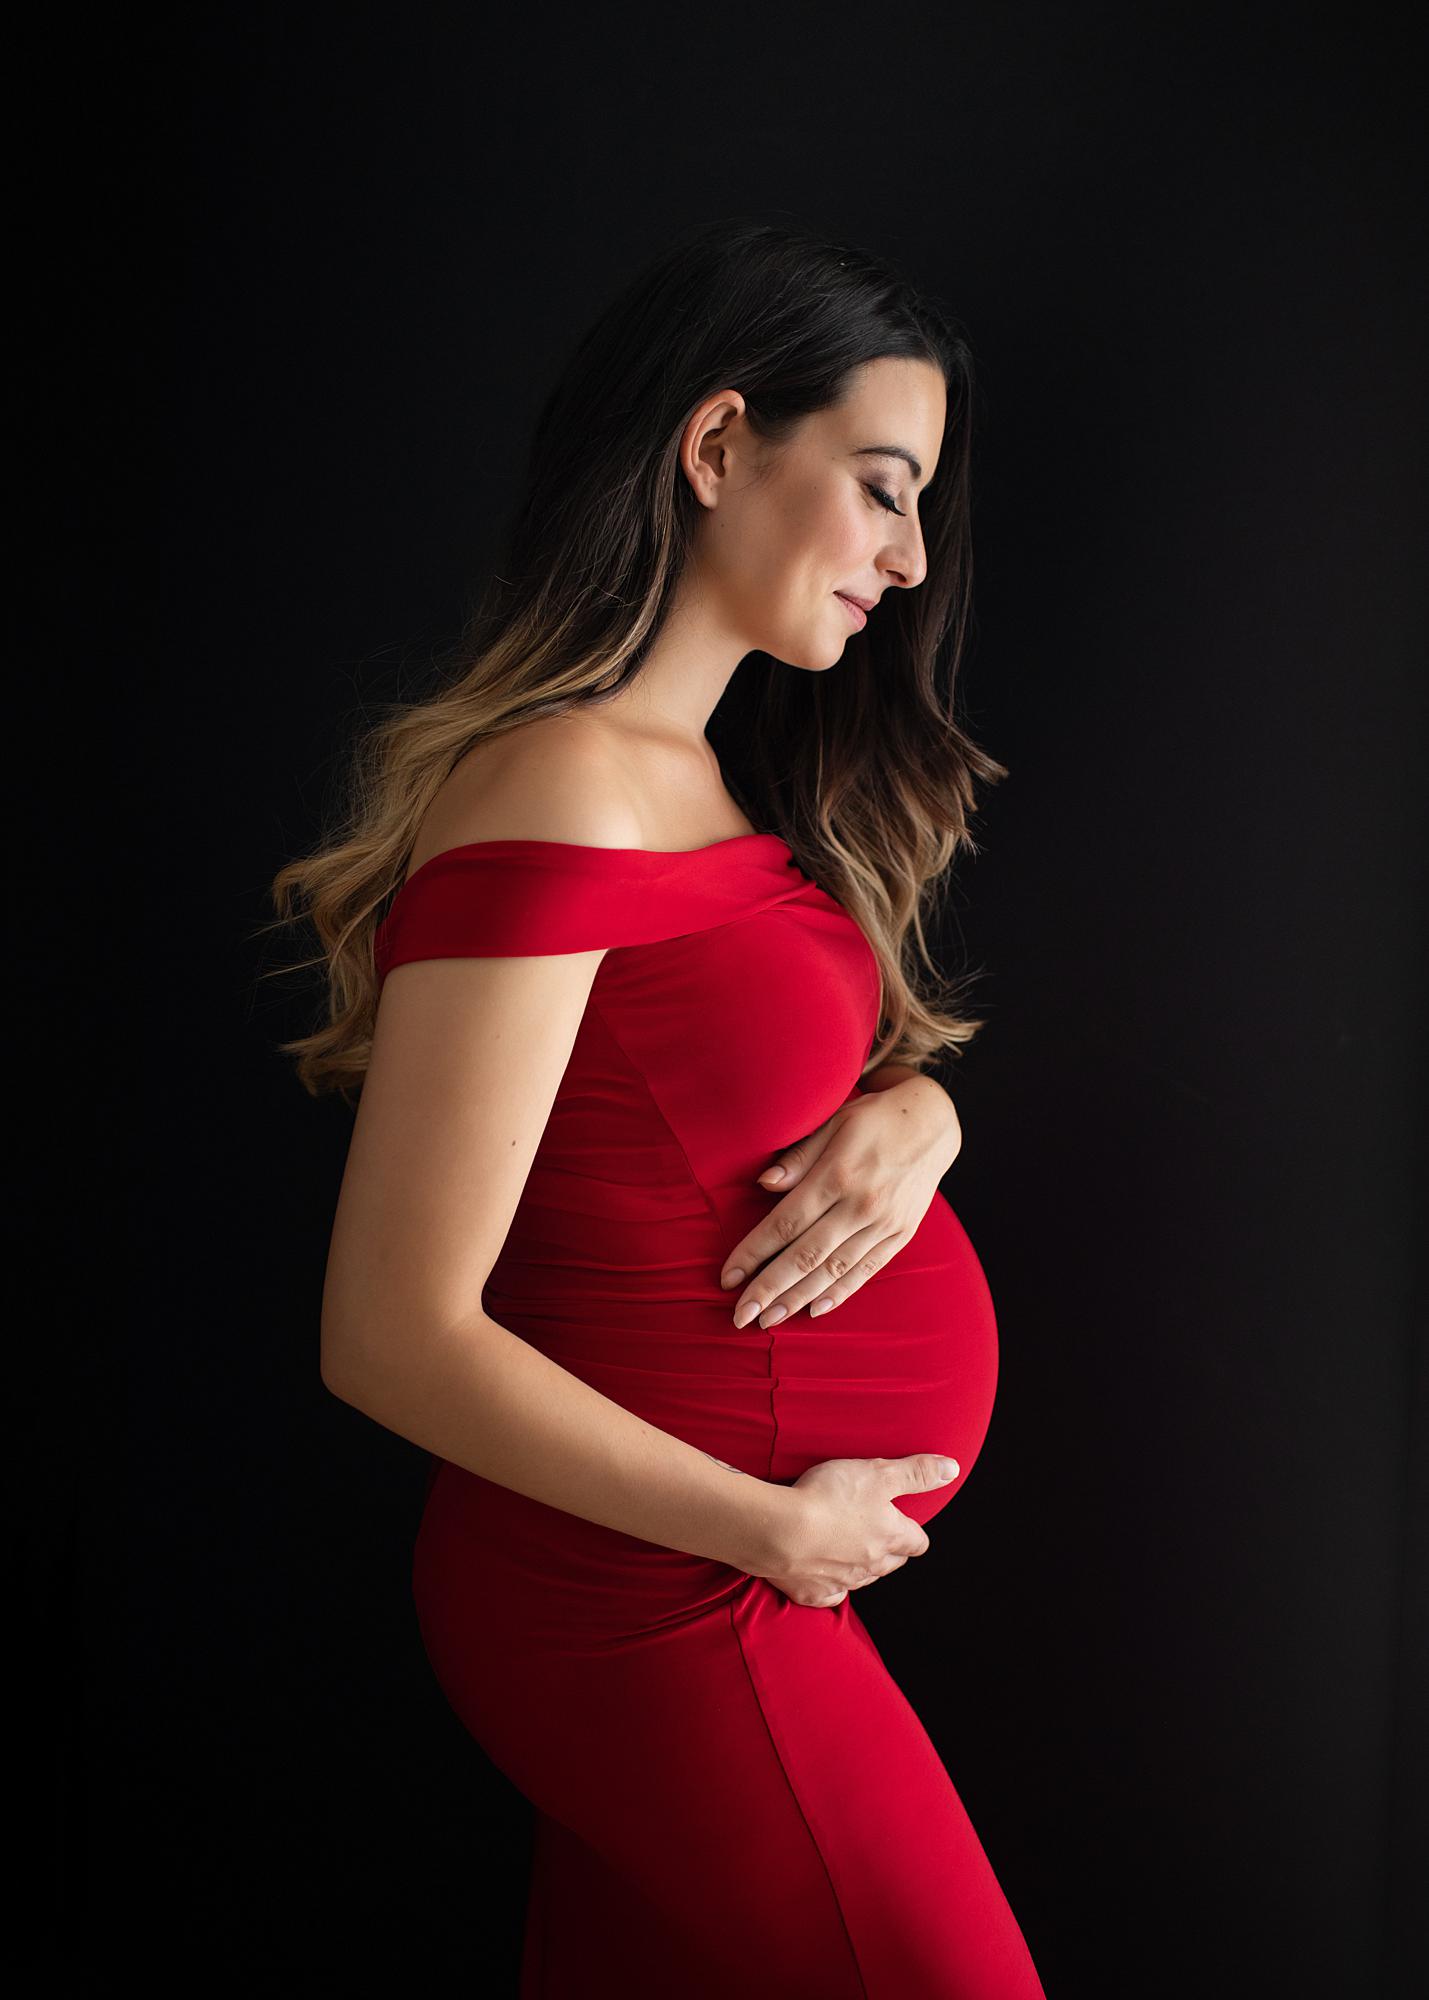 Pregnant woman posing in a red dress holds her pregnant belly for a maternity photoshoot in Suffolk